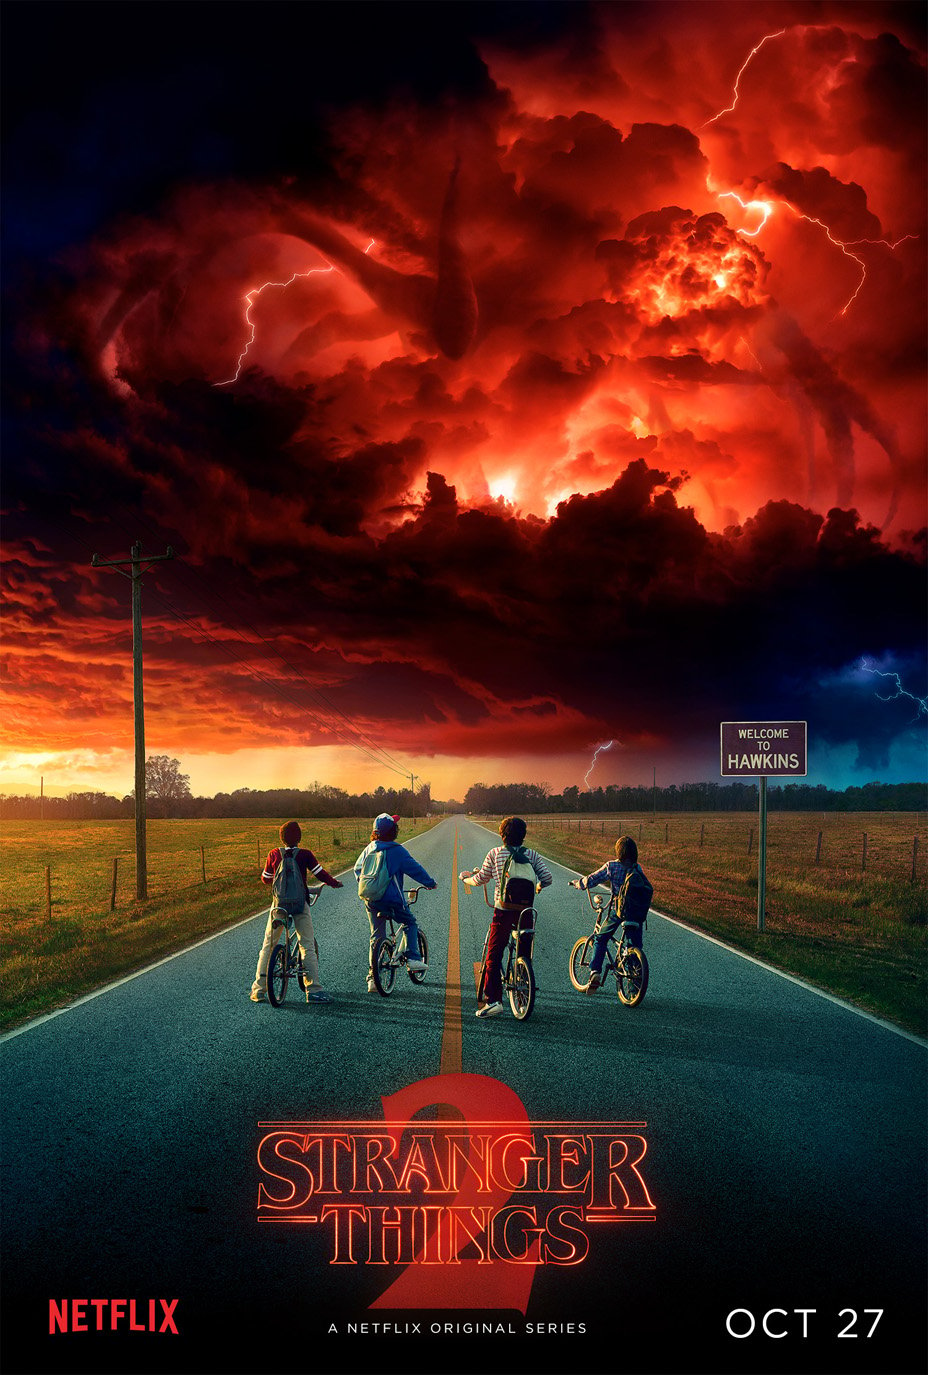 New Stranger Things Teaser Gives Us a Glimpse of New Monster | The Mary Sue